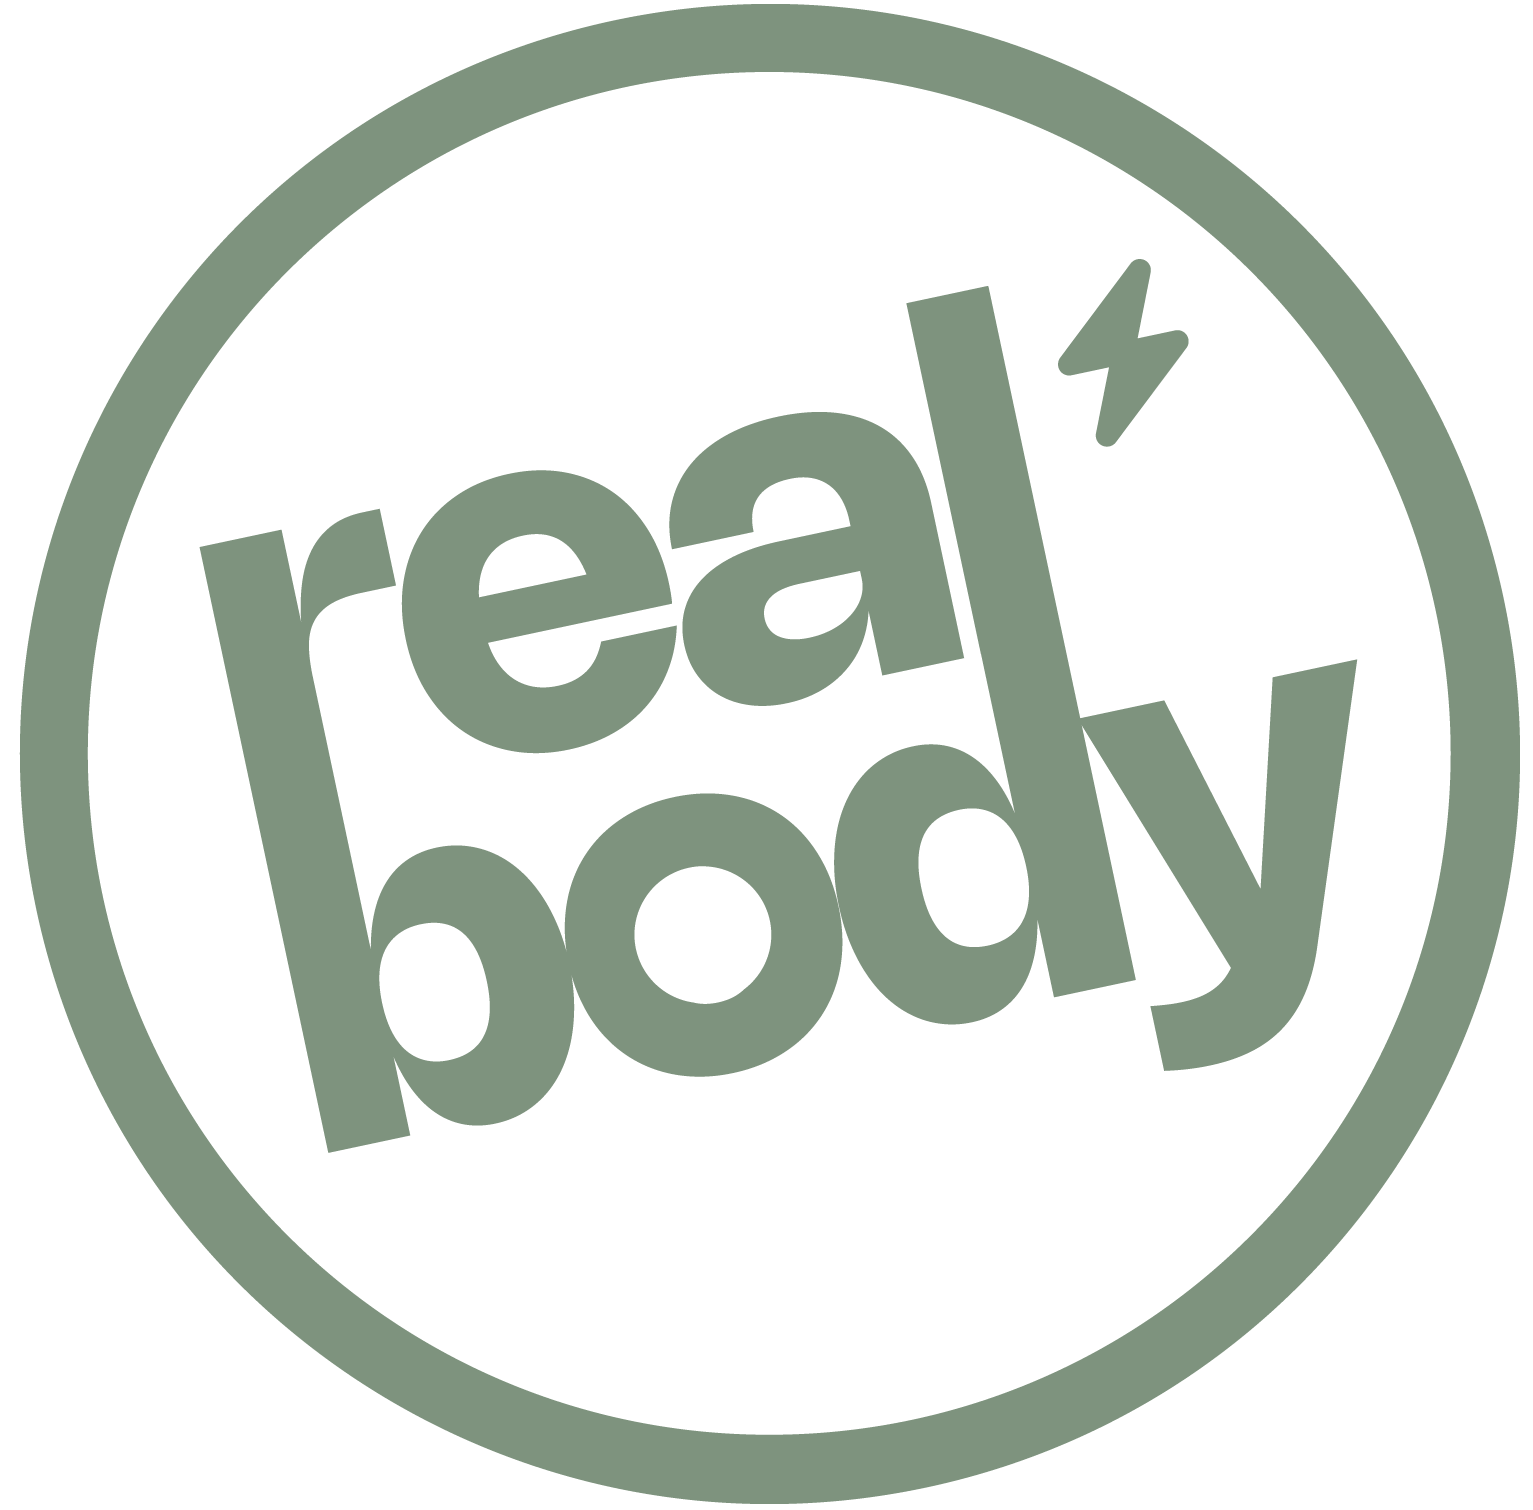 Real body